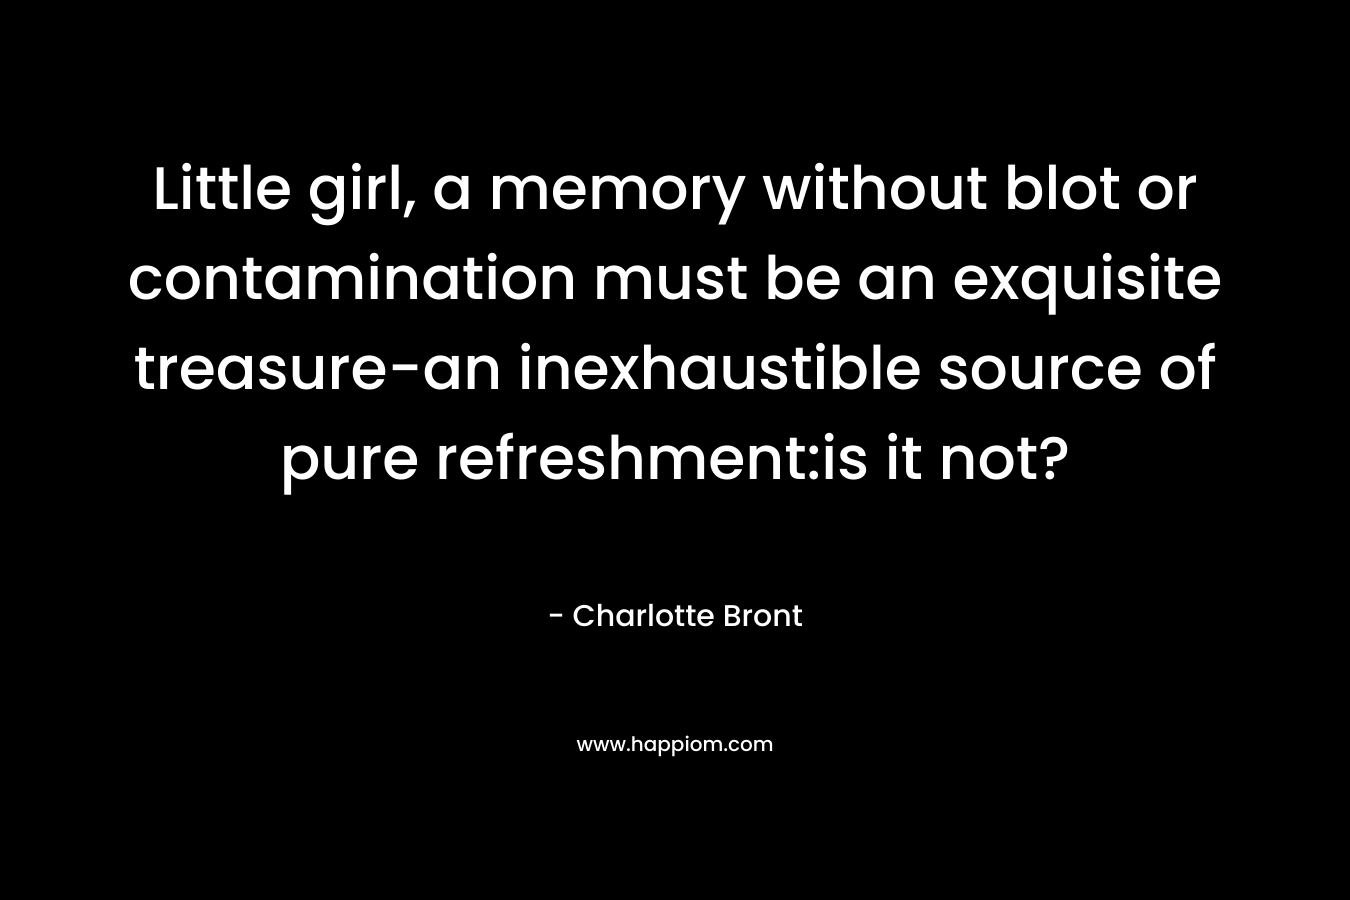 Little girl, a memory without blot or contamination must be an exquisite treasure-an inexhaustible source of pure refreshment:is it not?